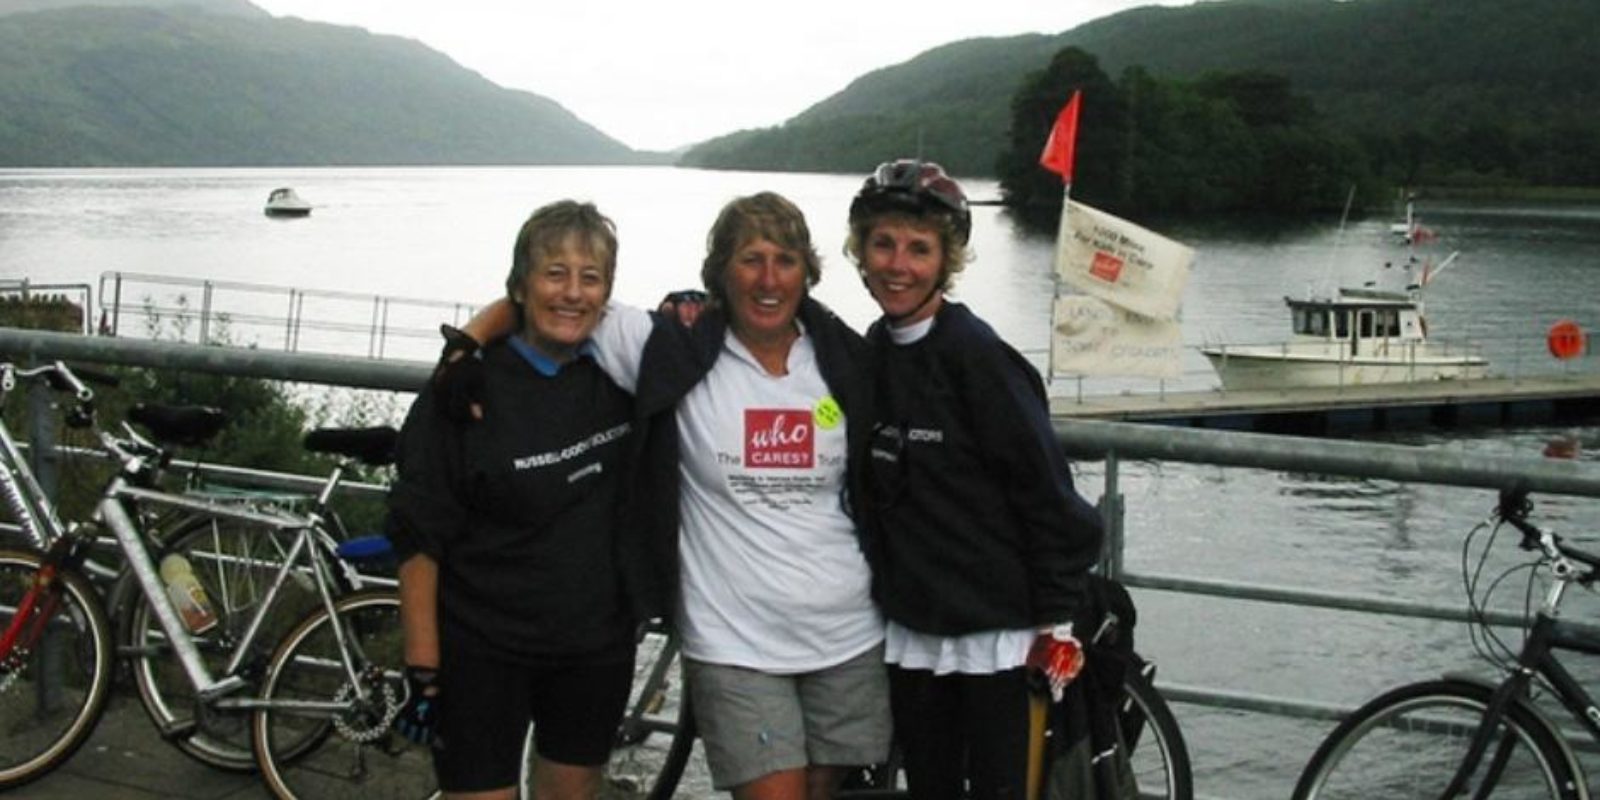 Pip, Gill and a friend stand in front of a lake with their bikes